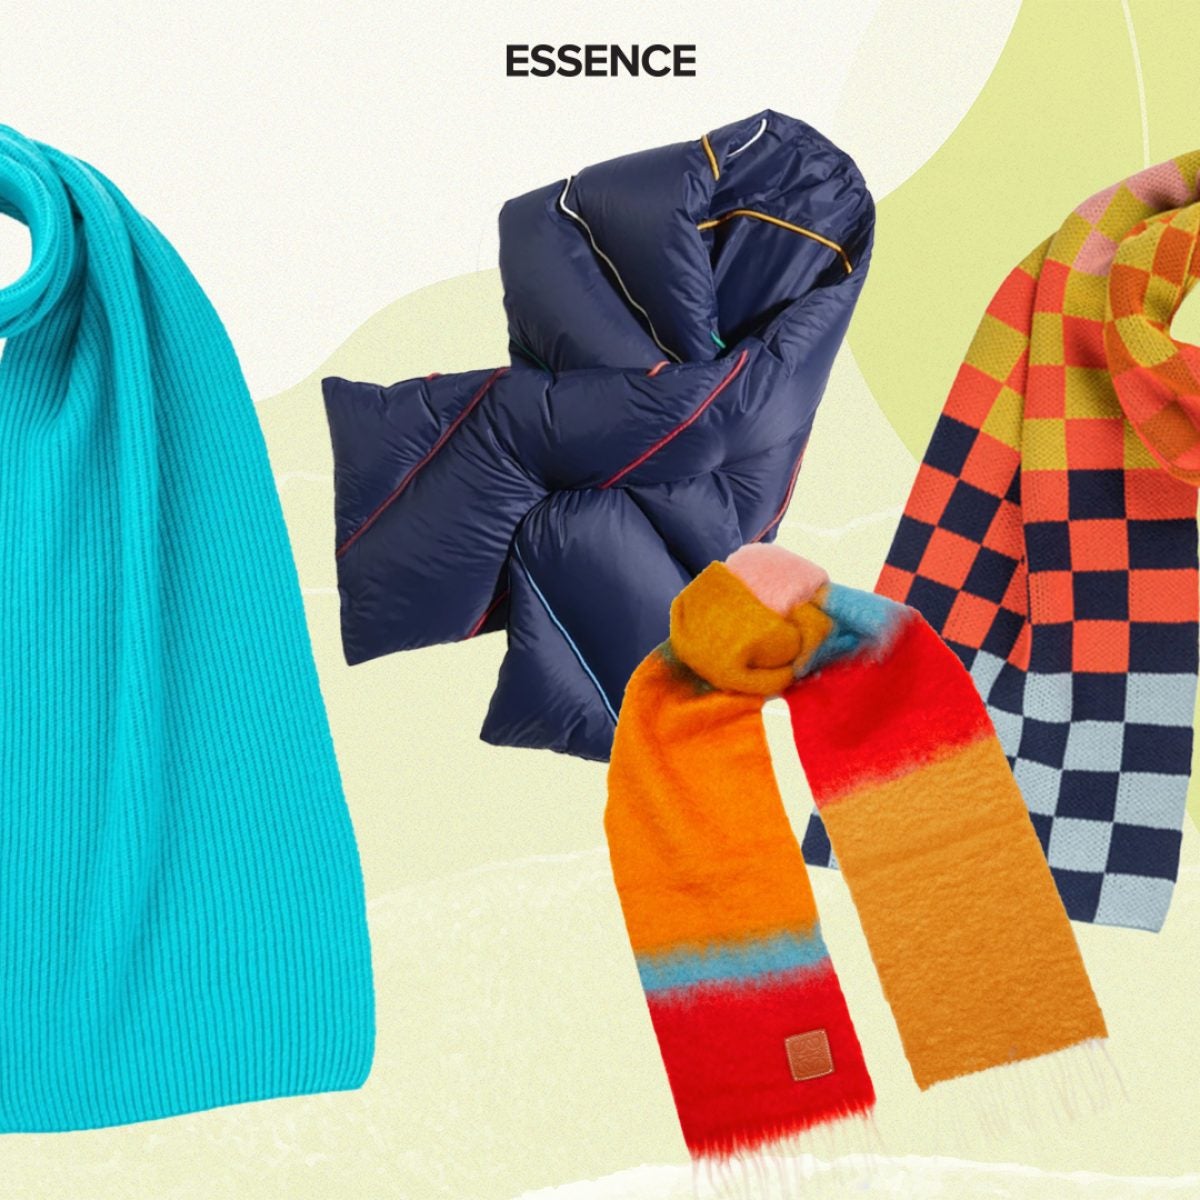 11 Winter Scarves That’ll Punch Up Your Outerwear